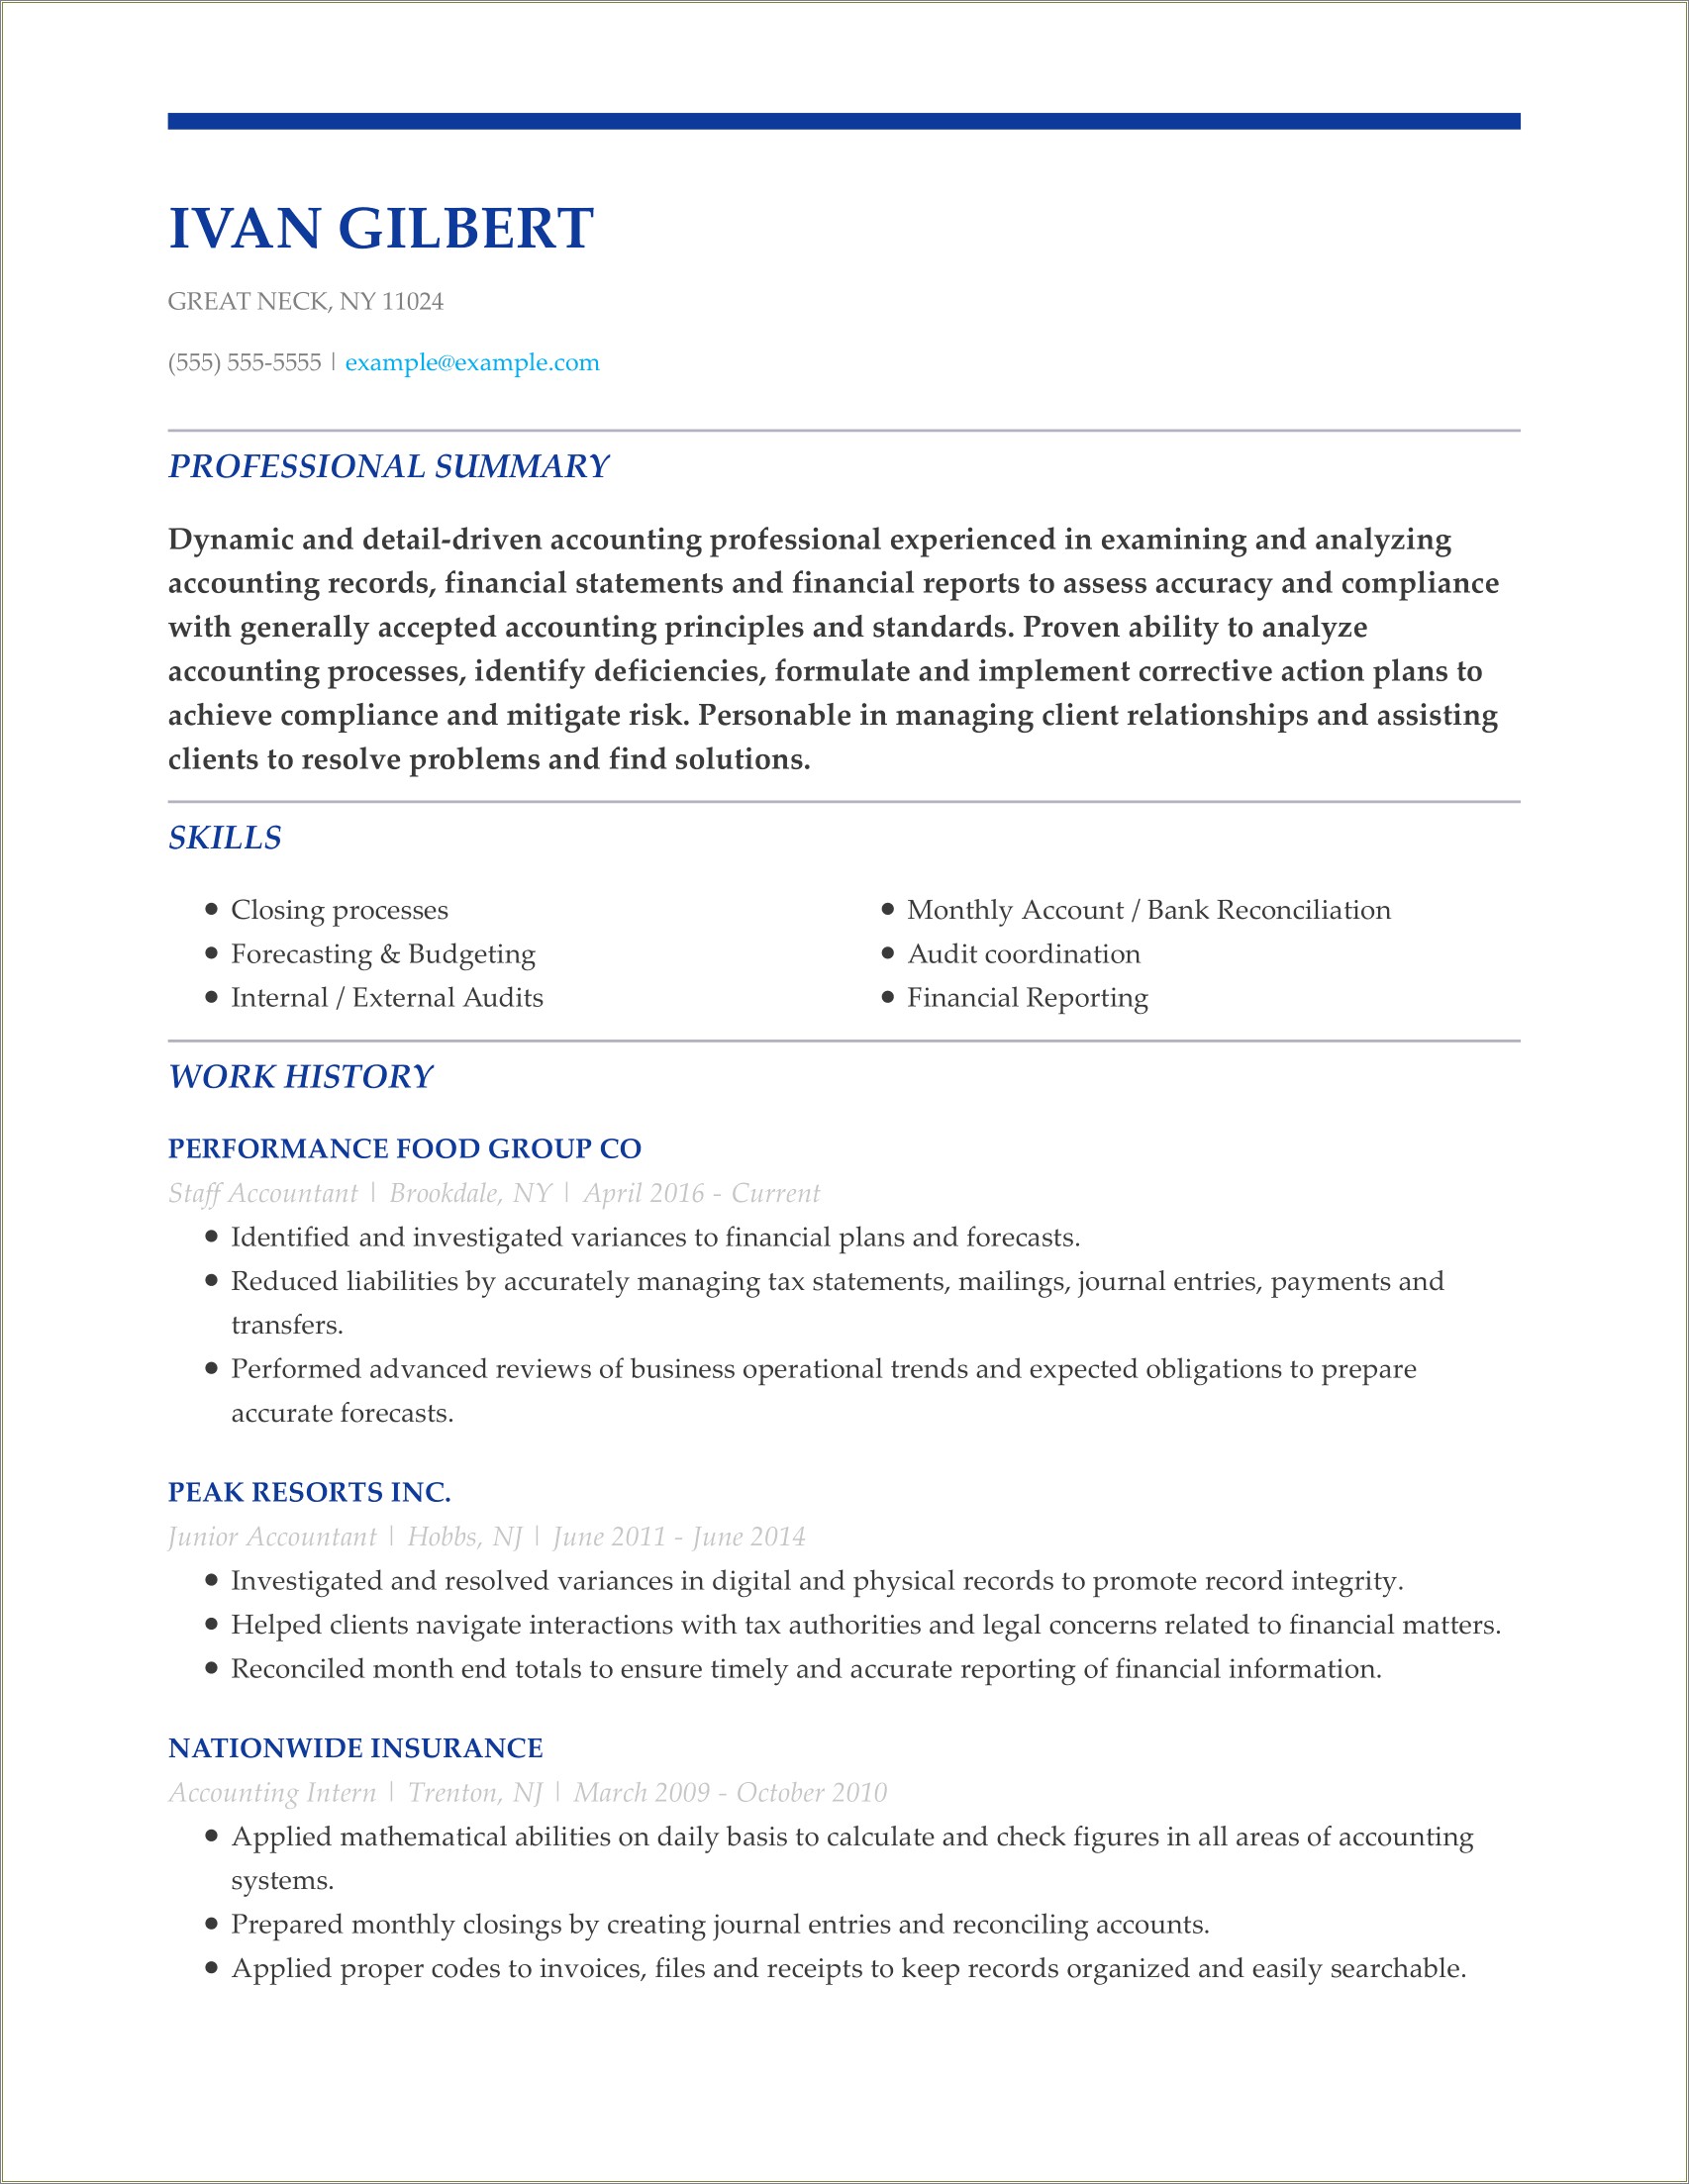 Example Resume Summary For Accounting Professional